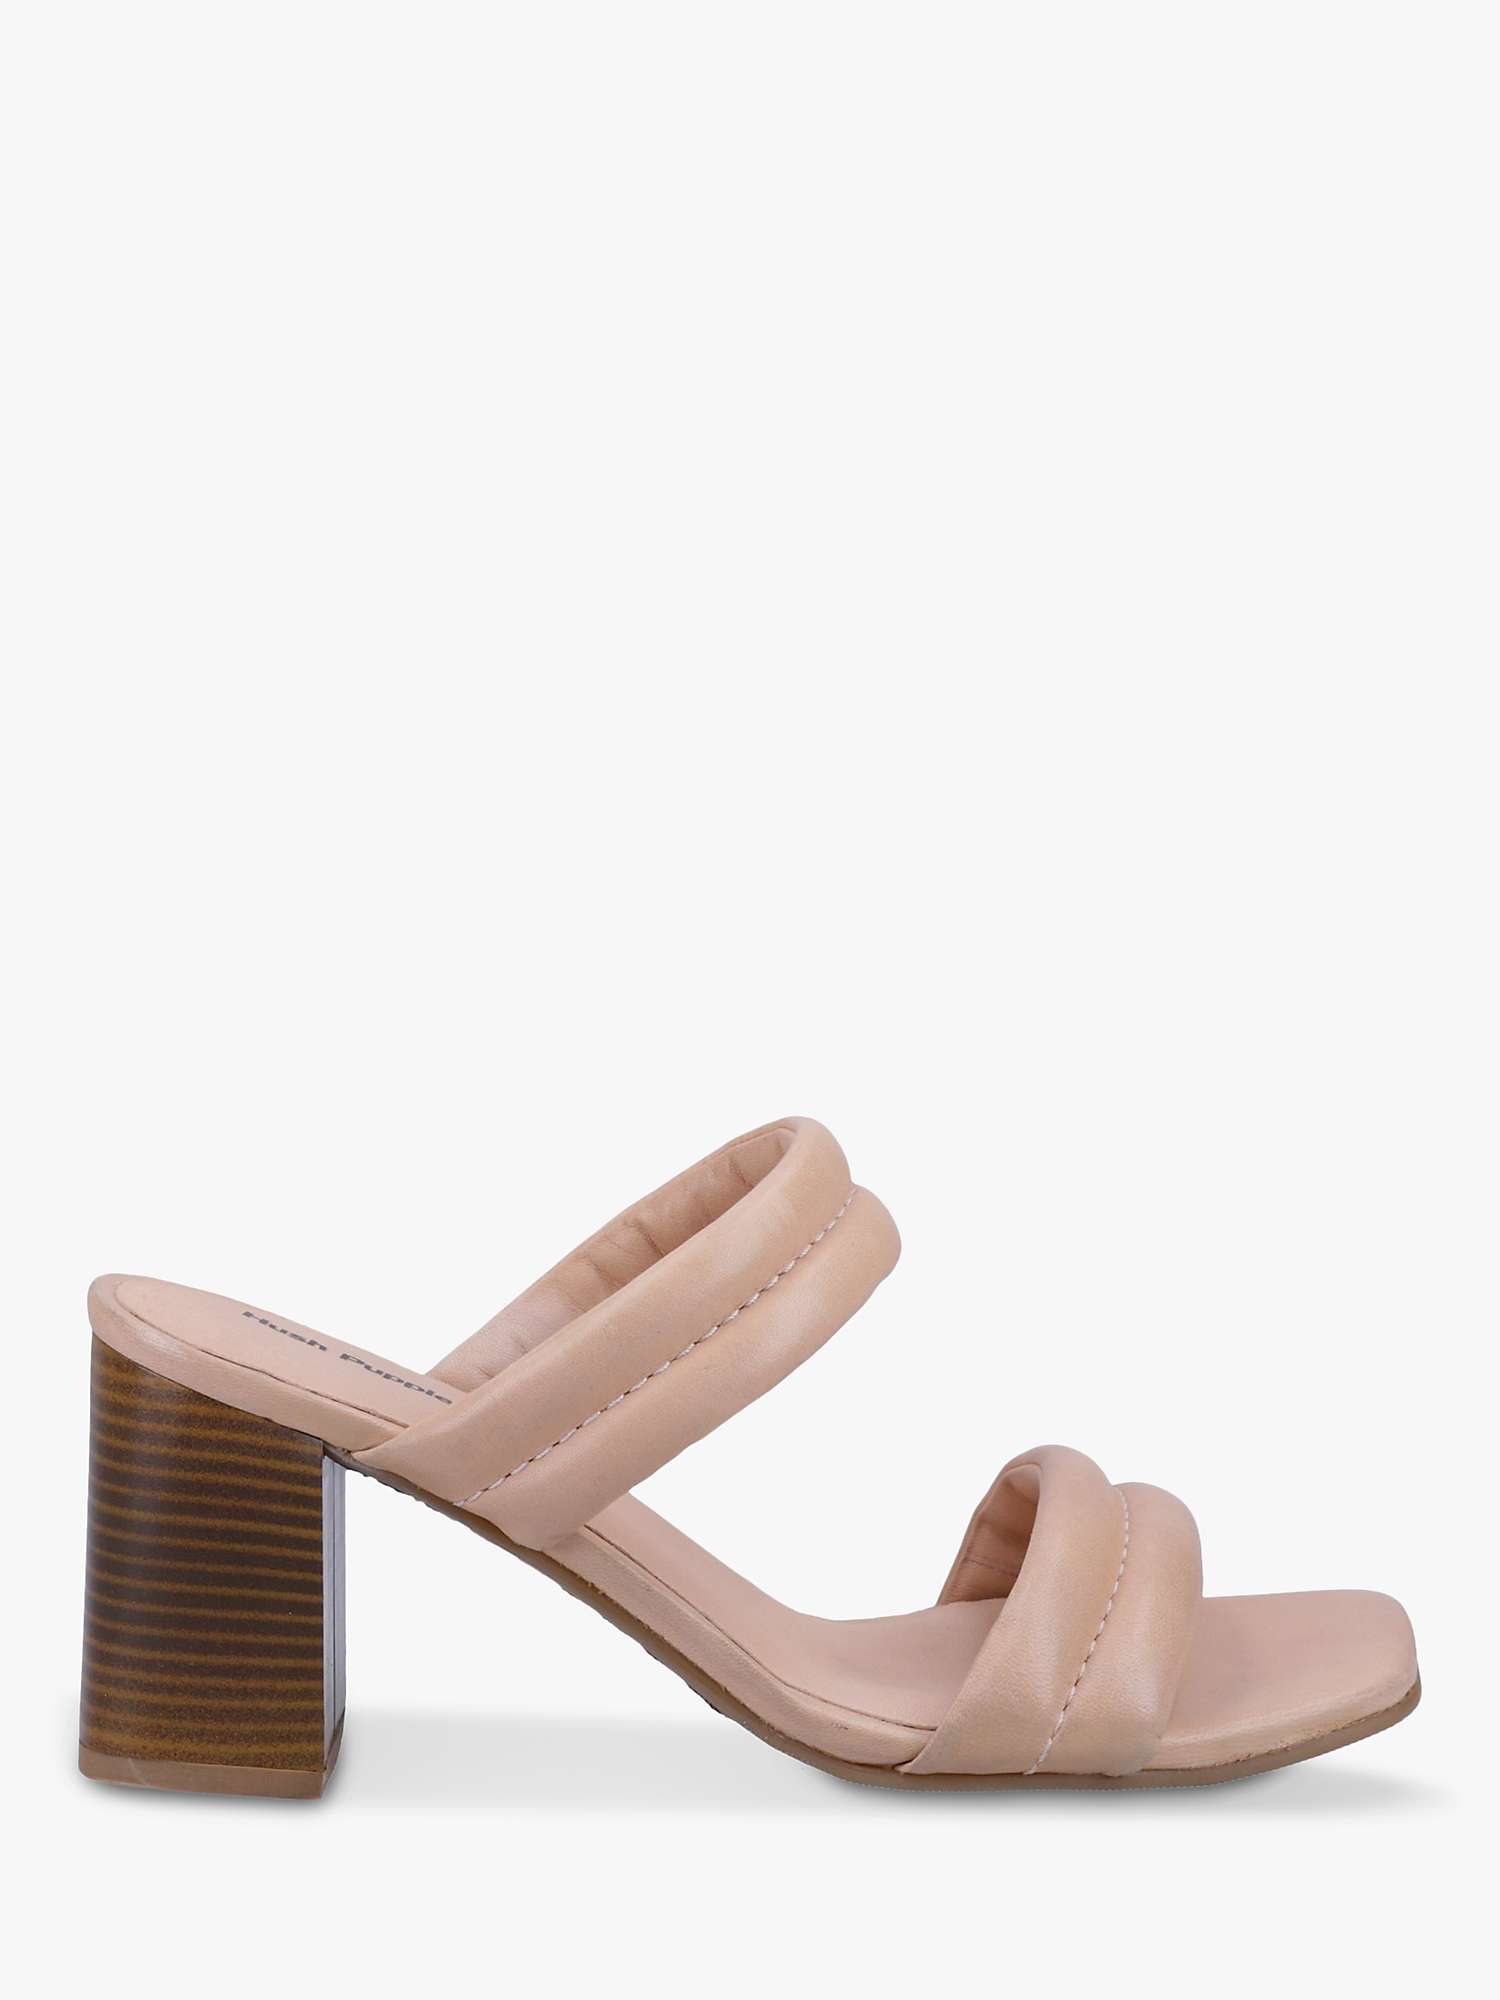 Buy Hush Puppies Katie Leather Heeled Sandals, Blush Online at johnlewis.com